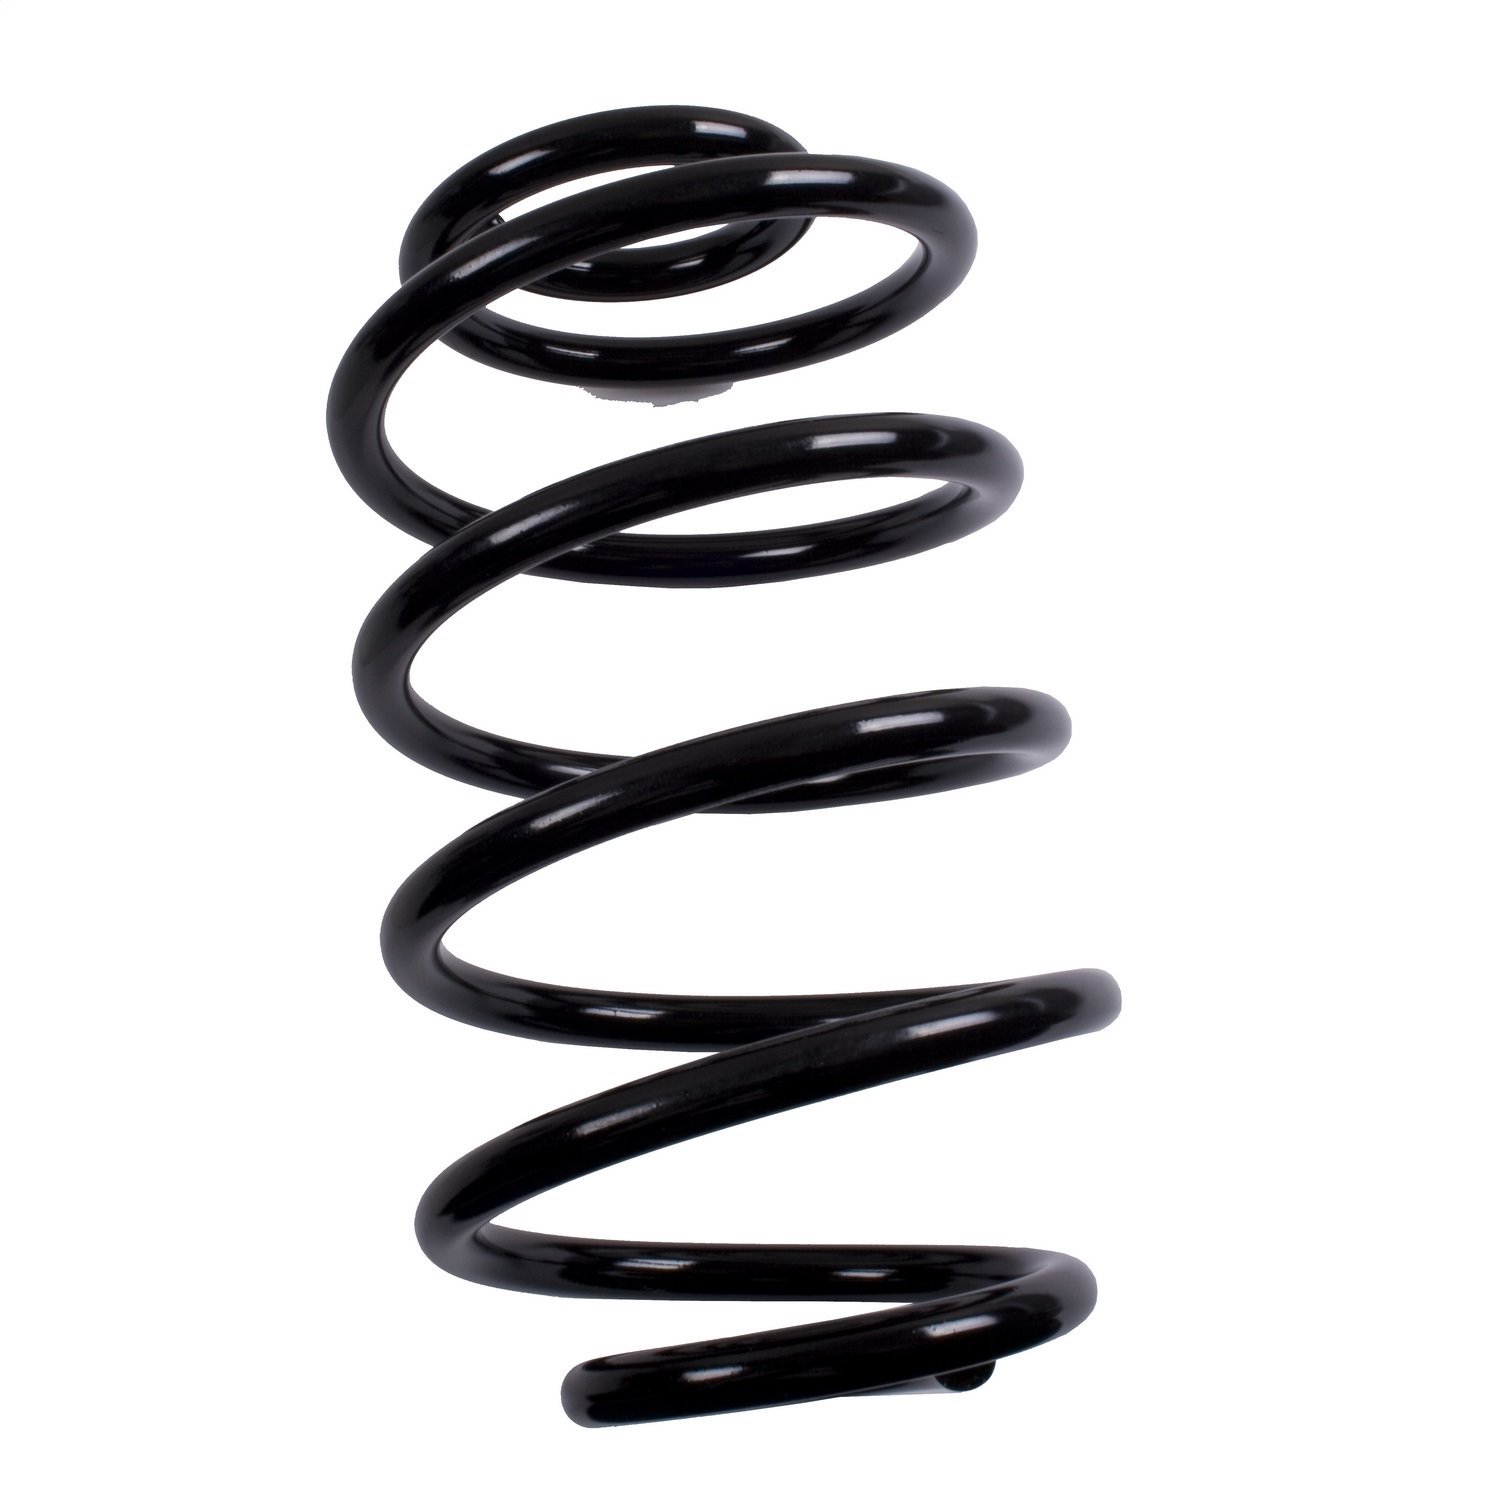 Stock replacement rear coil spring from Omix-ADA, Fits